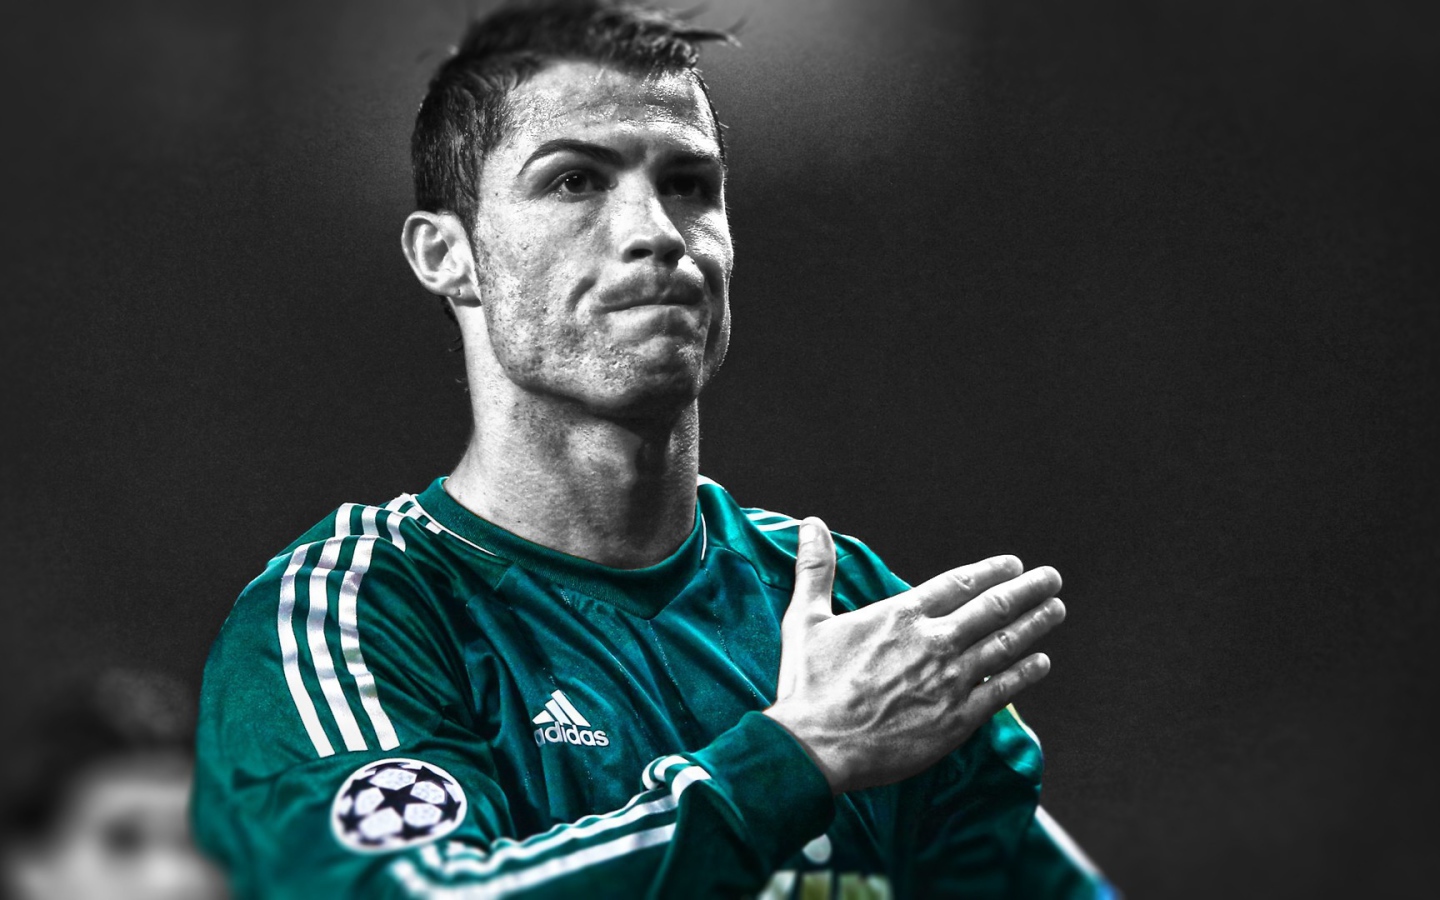 The player of Real Madrid Cristiano Ronaldo in dark background